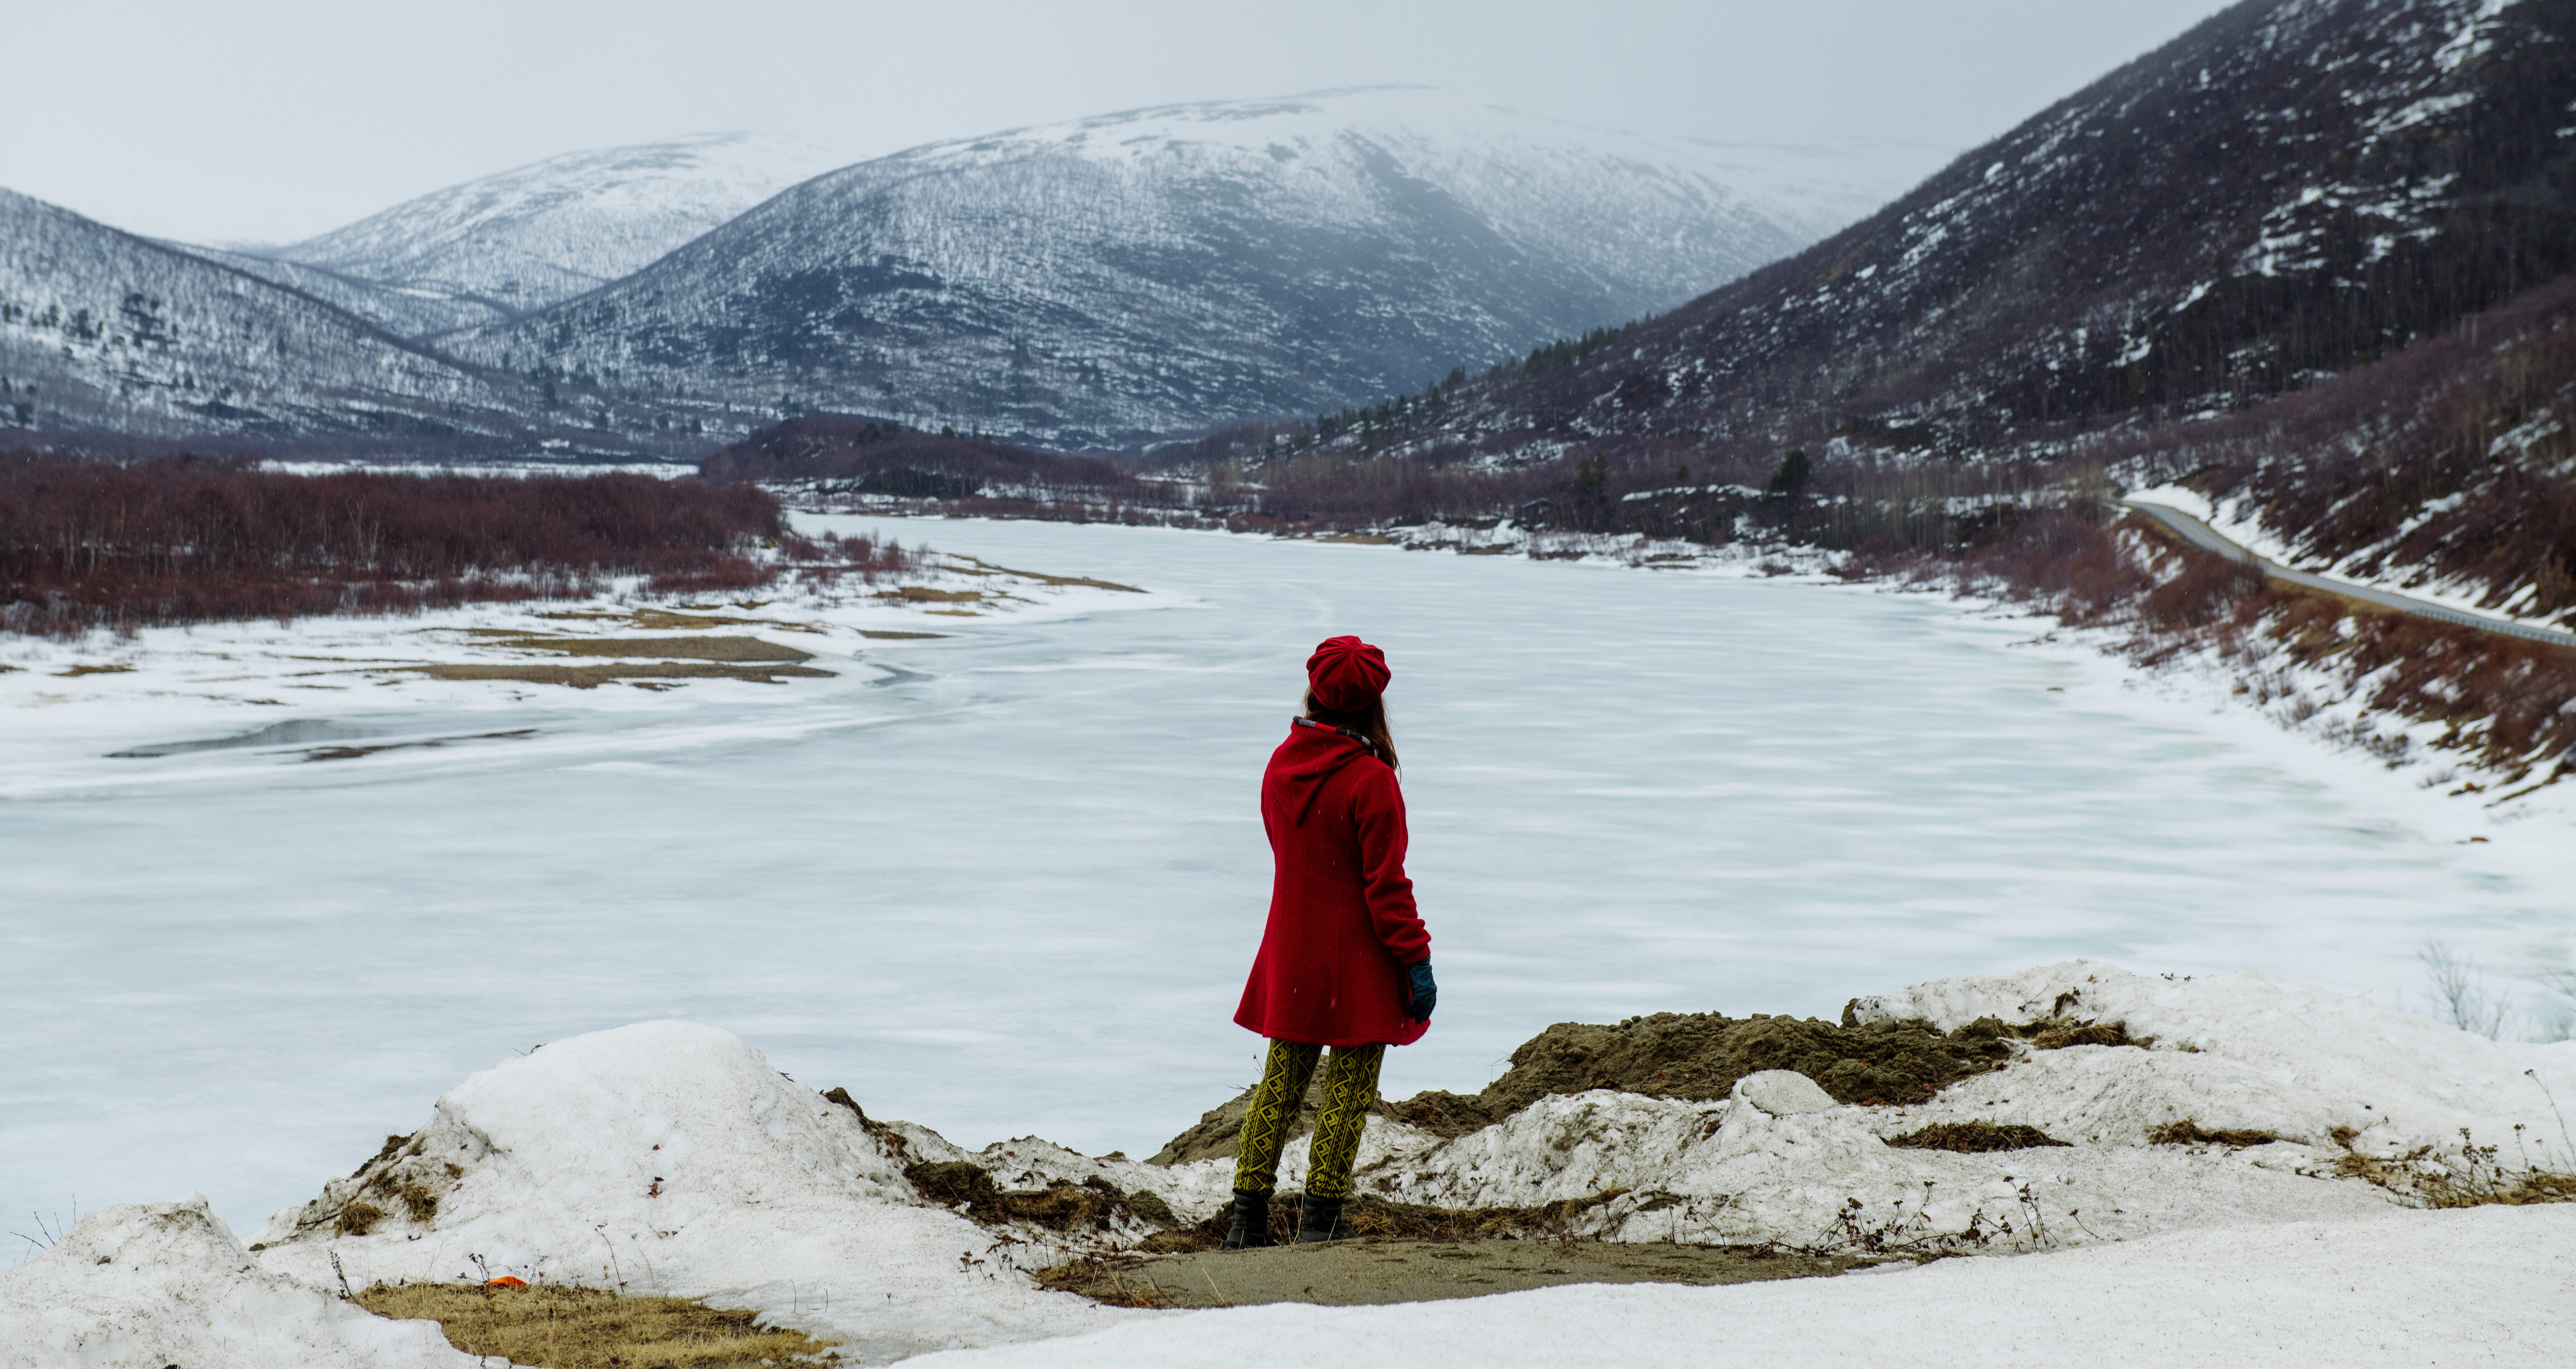 Practice-led design research professor, Maarit Mäkelä, looking into the horizon in front of a frozen lake and snowy mountains of Lapland.